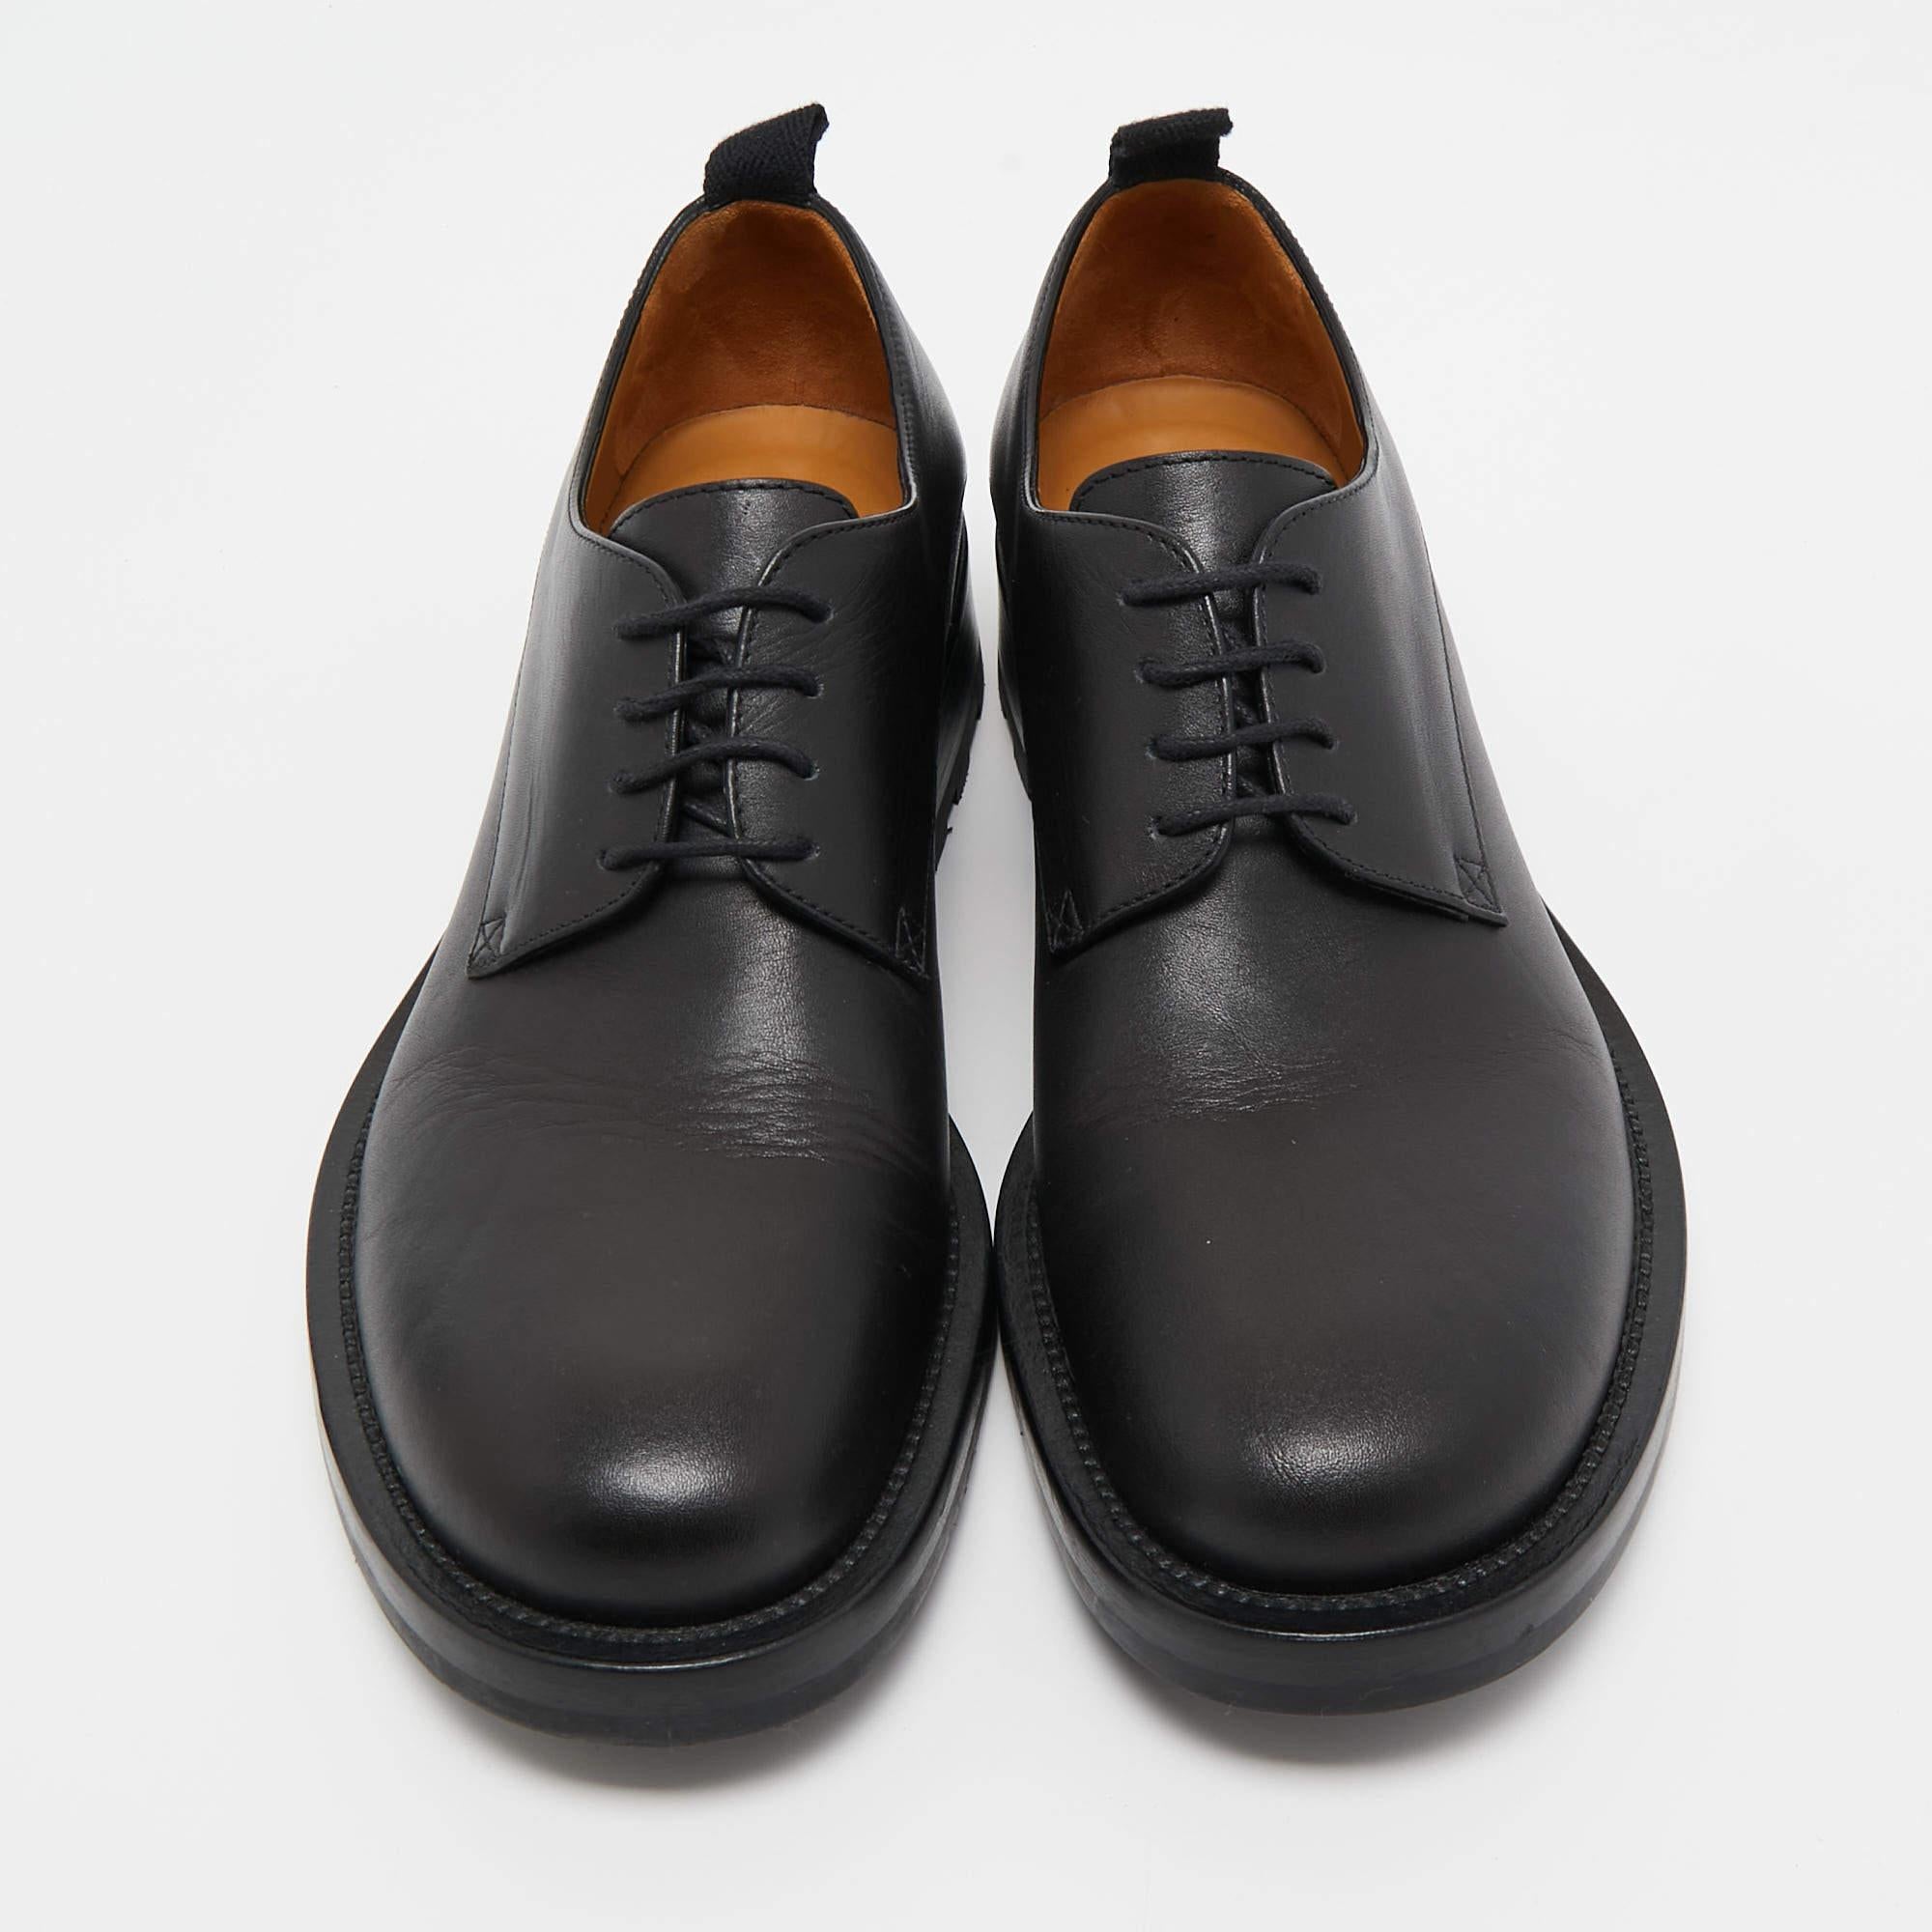 Give your outfit a luxe update with this pair of Valentino derby shoes. The shoes are sewn perfectly to help you make a statement in them for a long time.

Includes: Original Box, Info Booklet